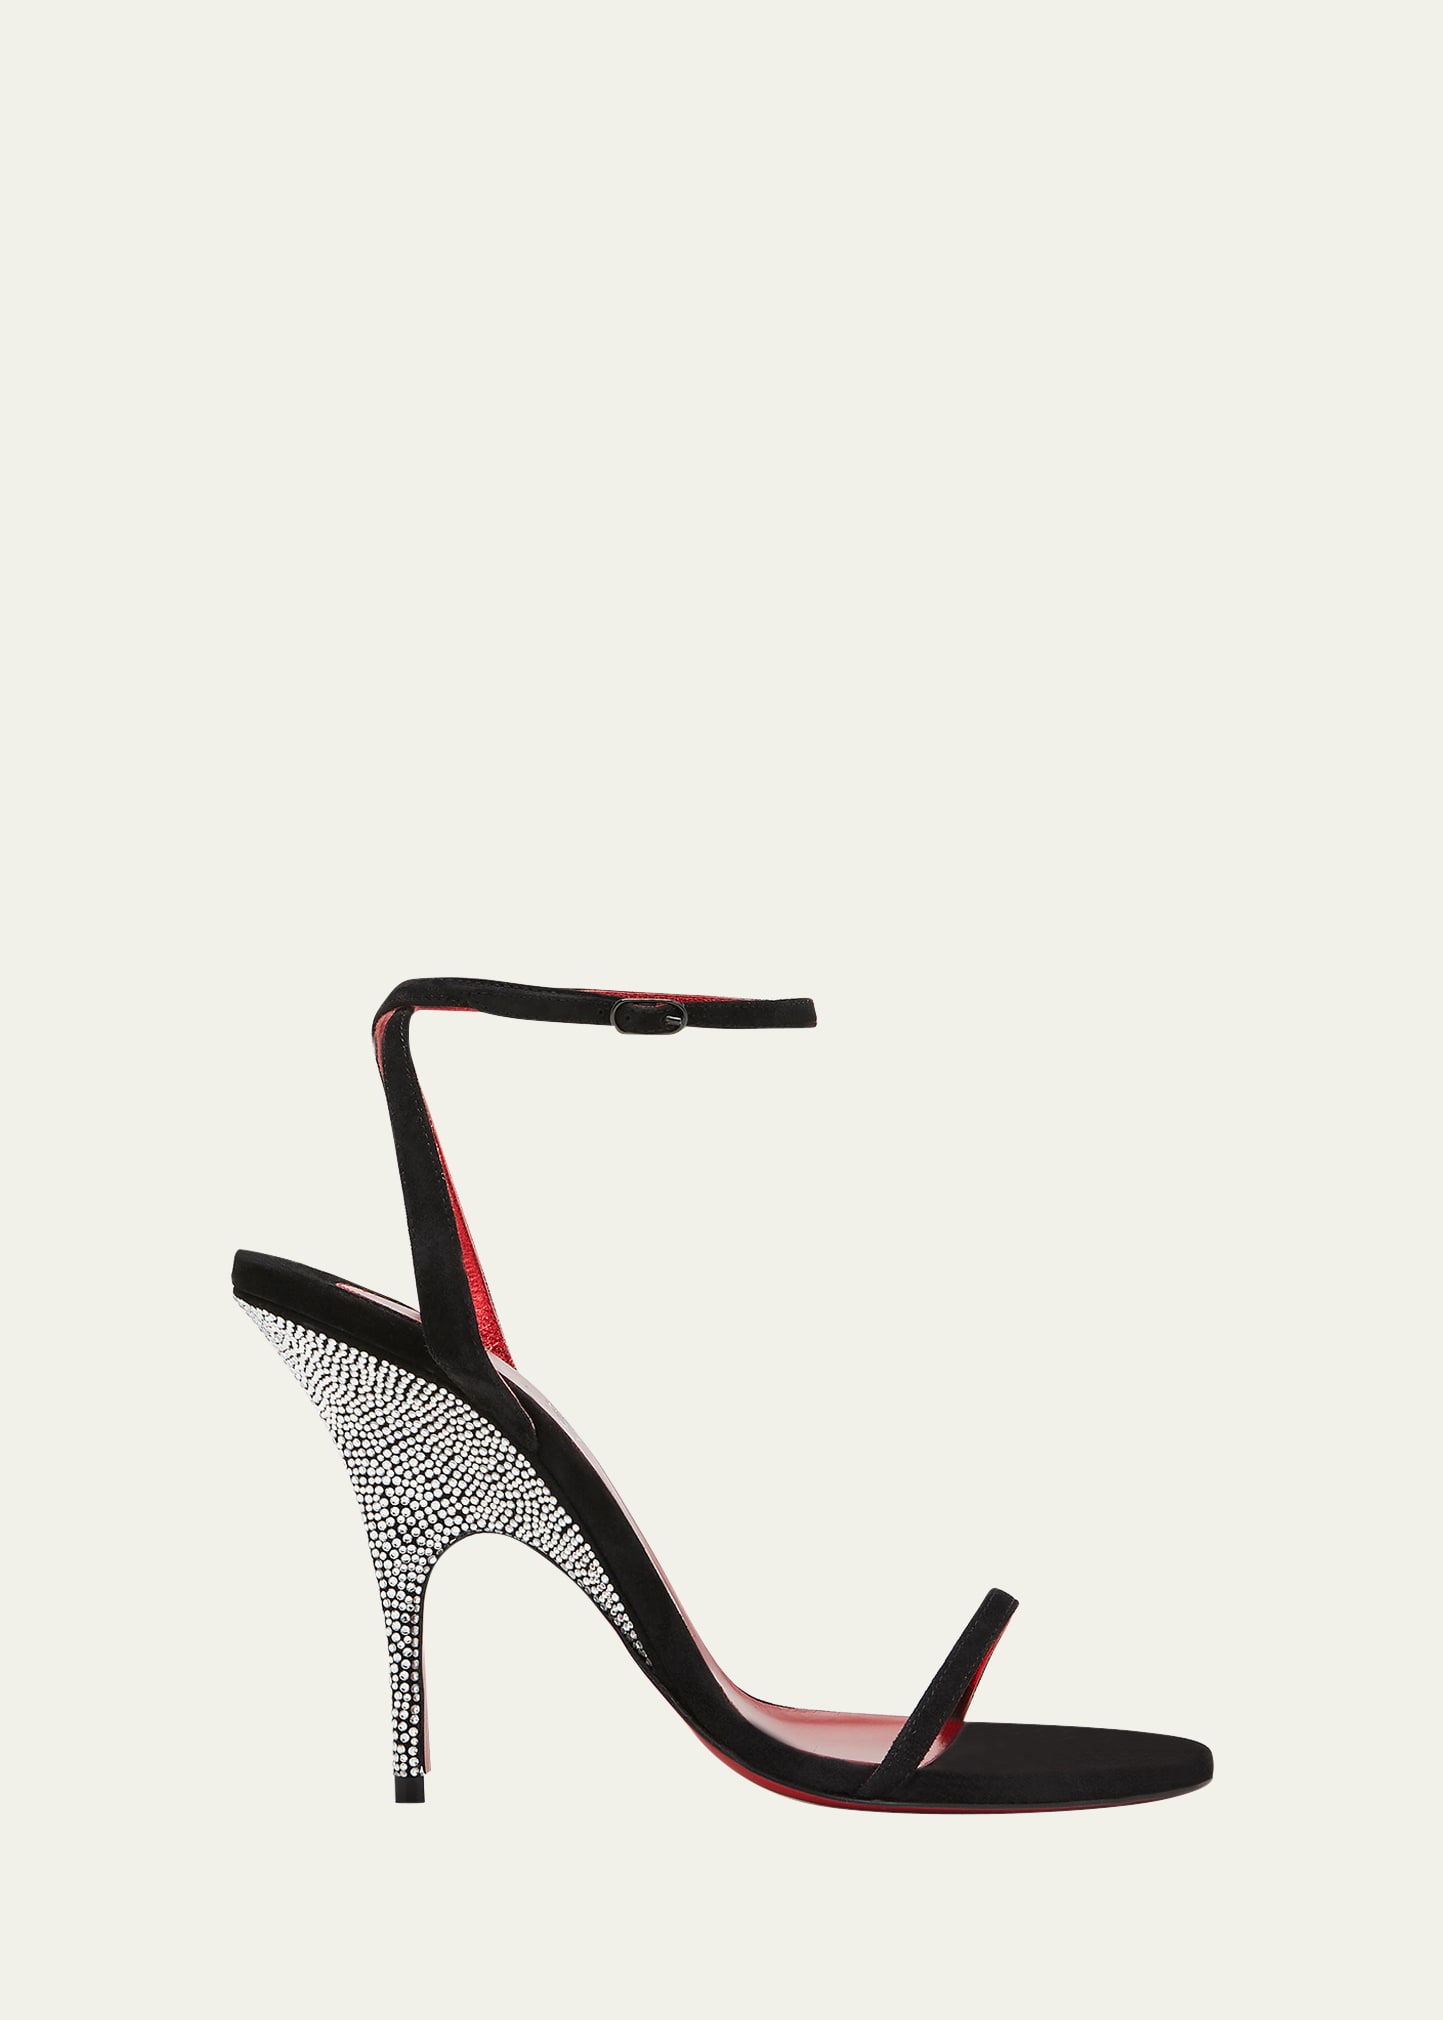 CHRISTIAN LOUBOUTIN ARCH QUEEN EMBELLISHED RED SOLE SANDALS